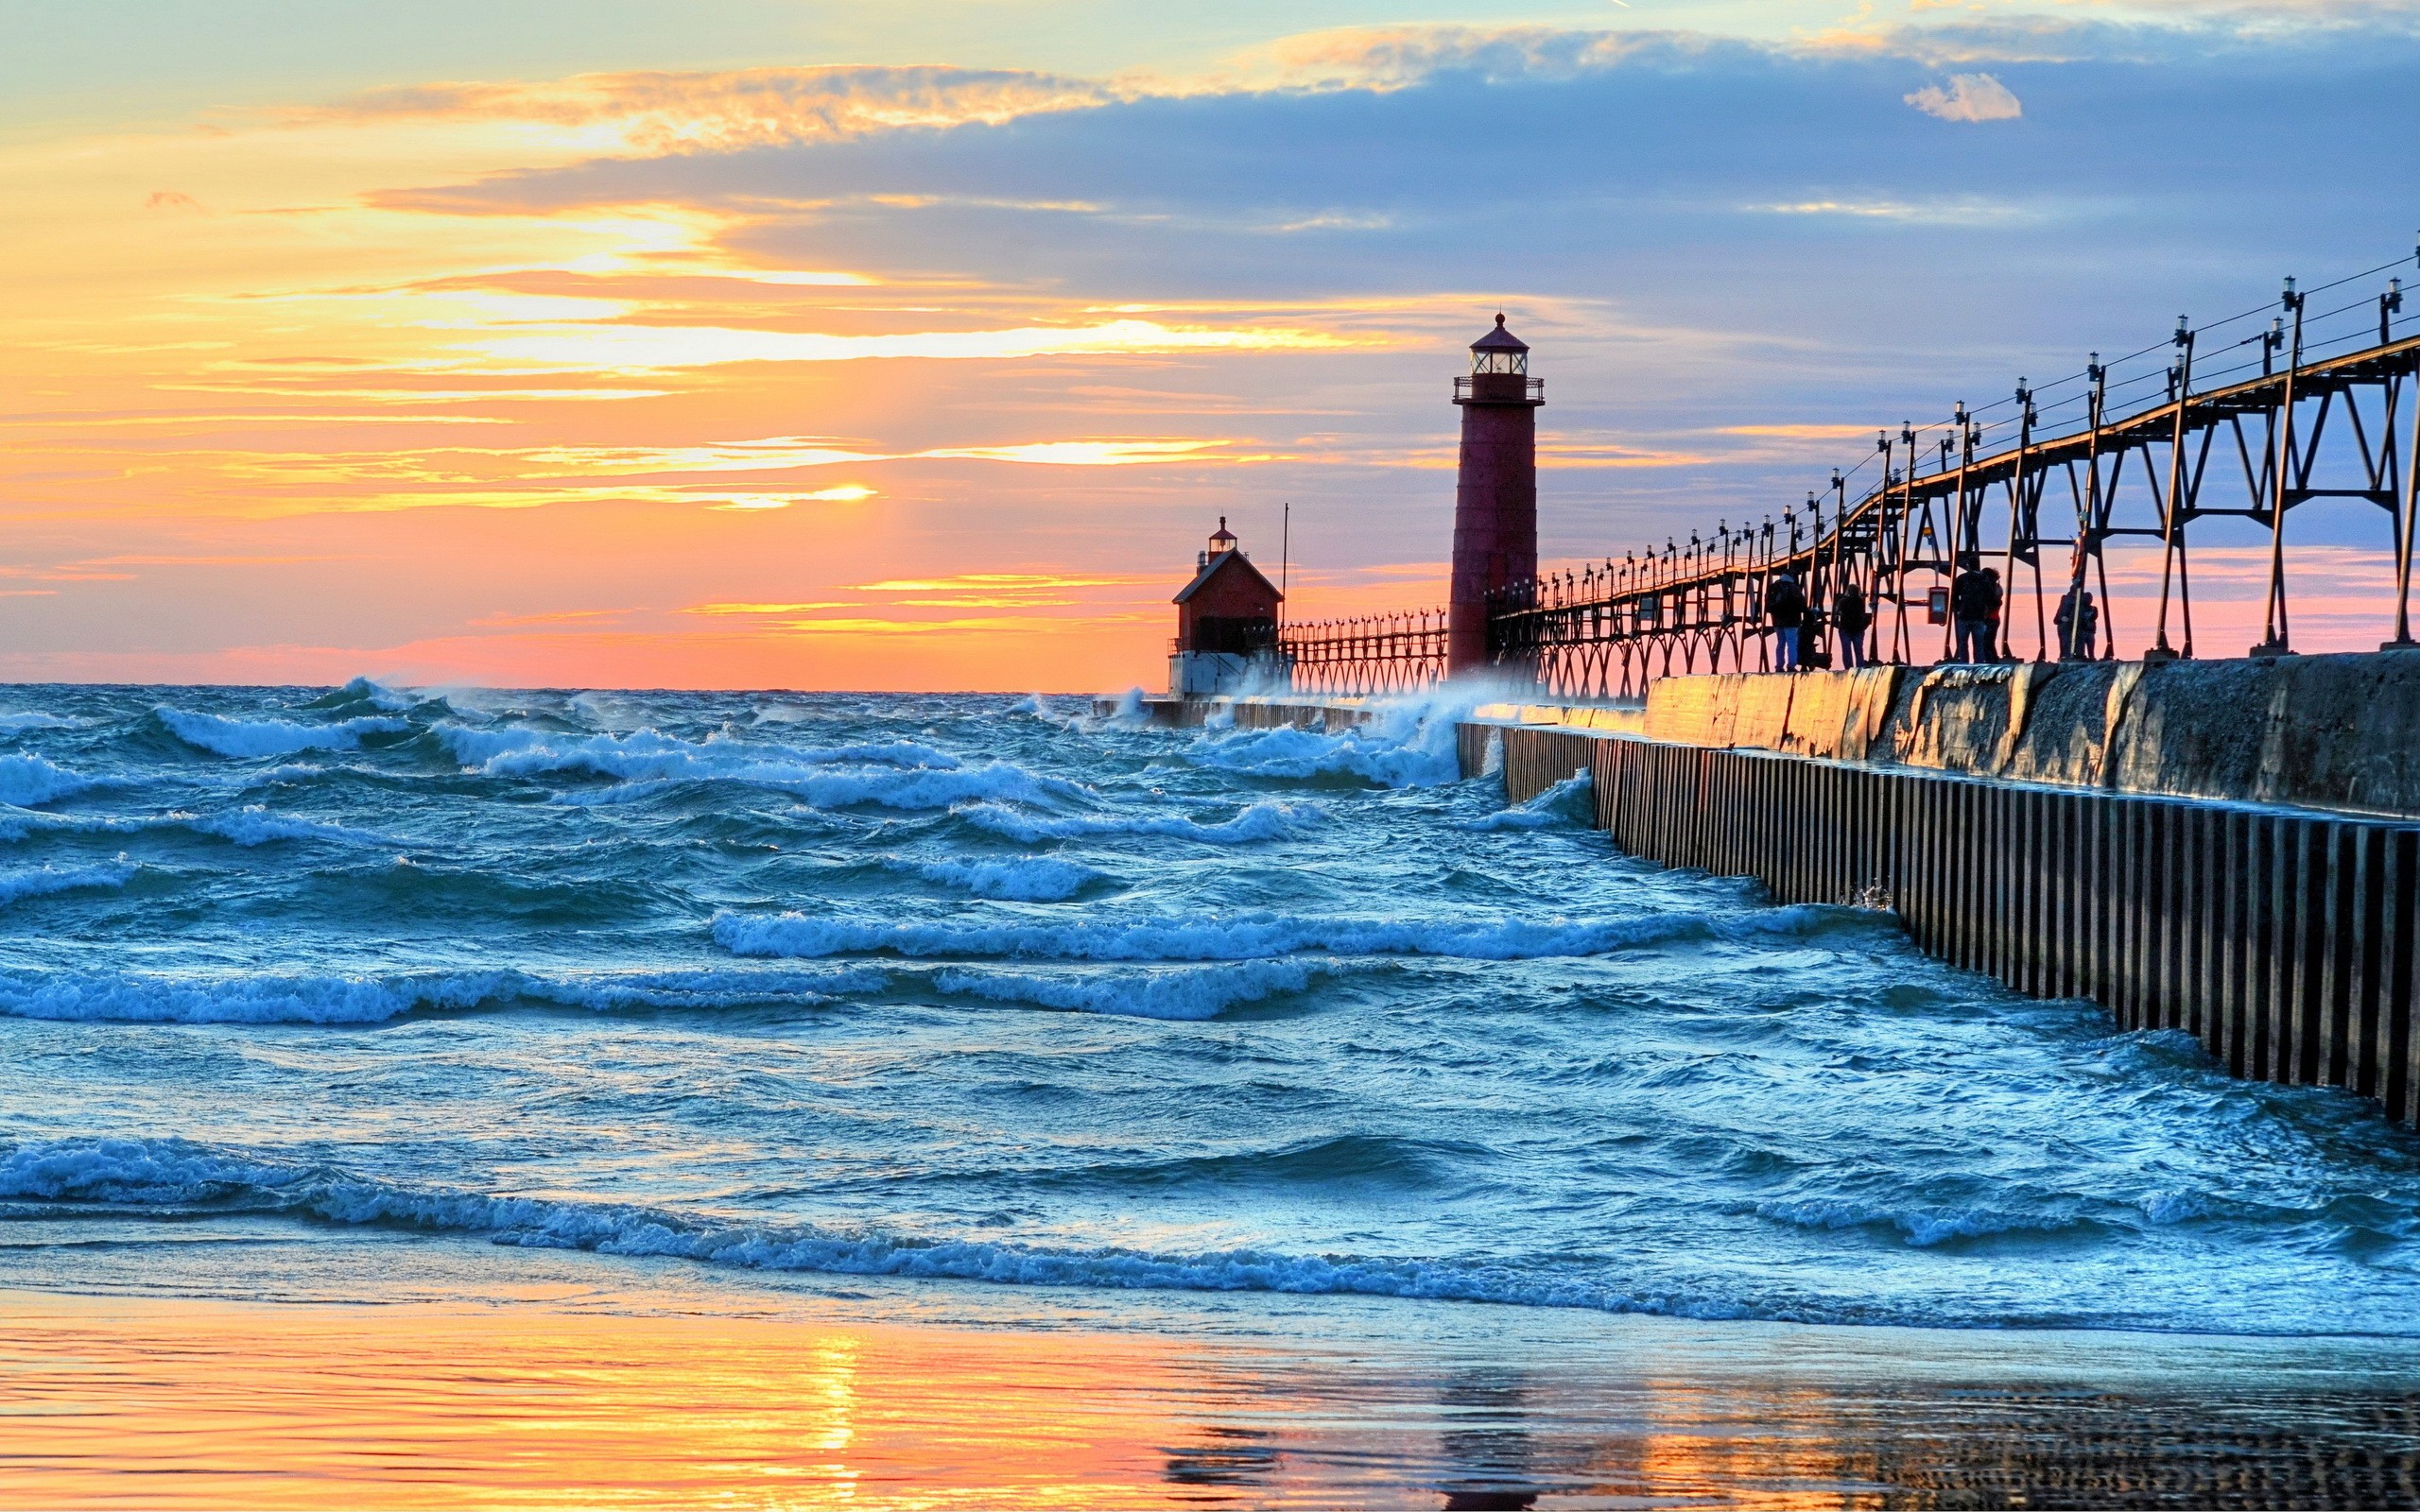 General 2560x1600 nature sunset sea waves pier lighthouse